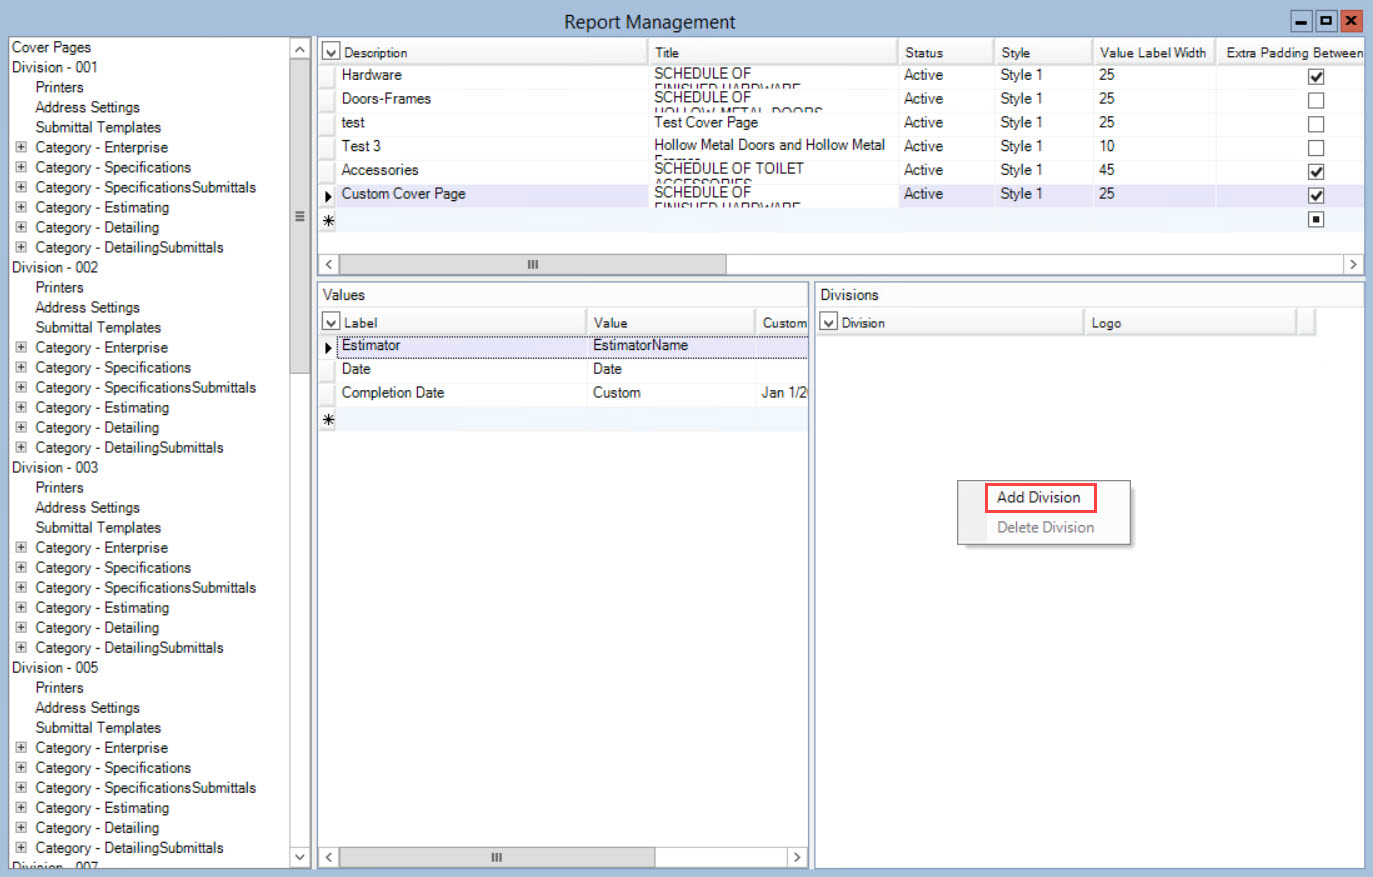 Report Management window; shows the Divisions pane right-click menu and the location of Add Division.